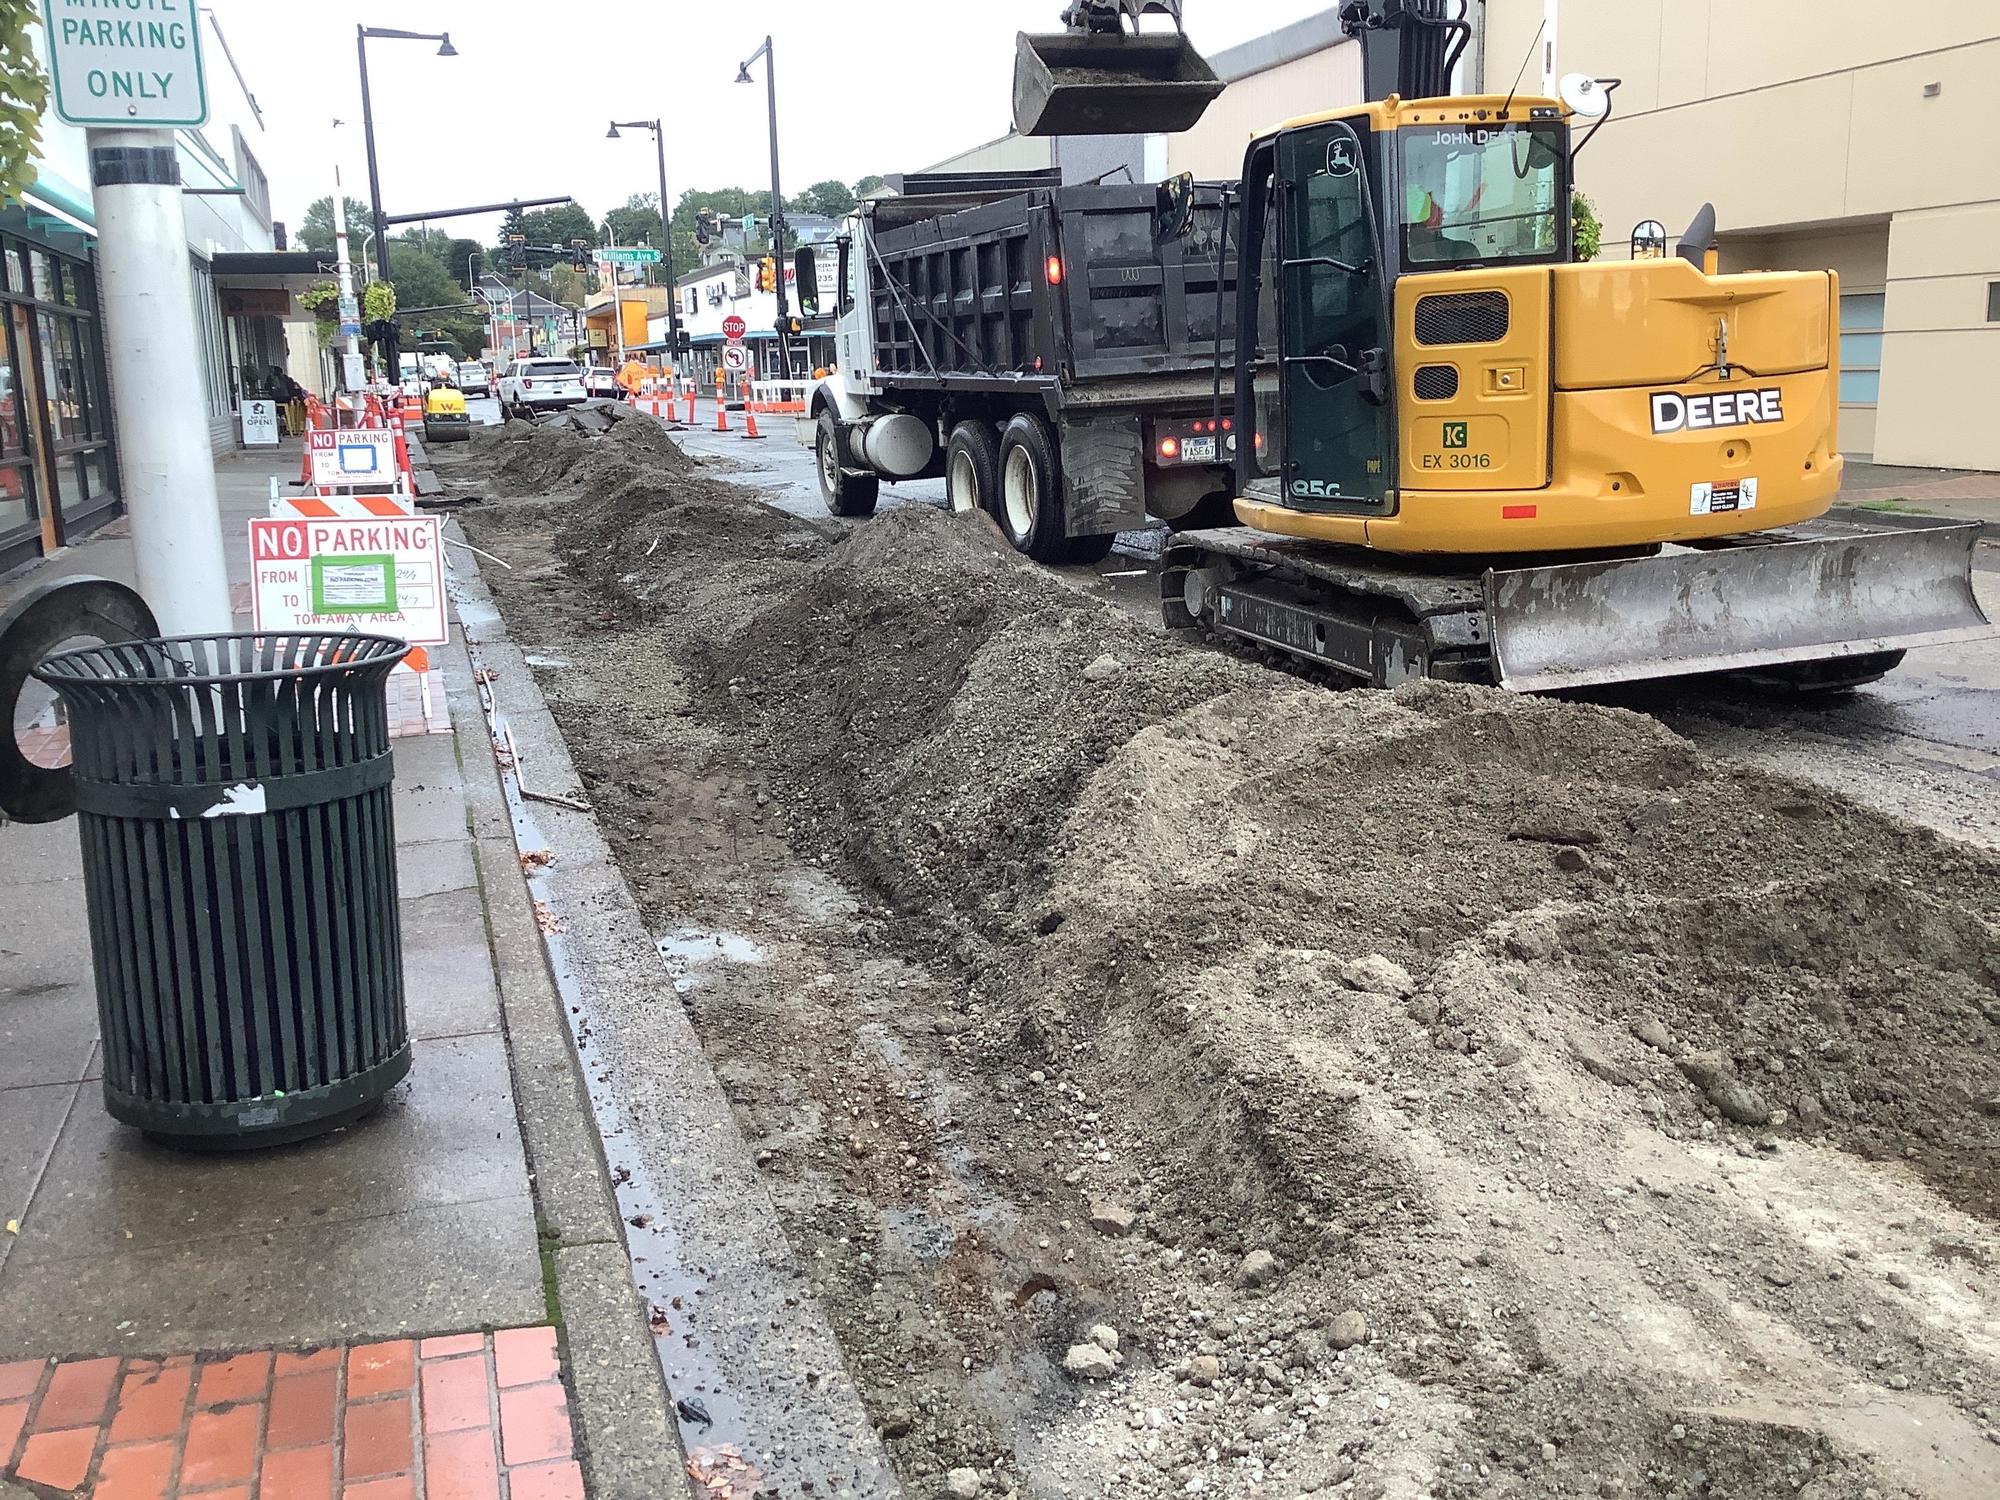 Crews use heavy equipment to add gravel and compact it in the curbside parking  